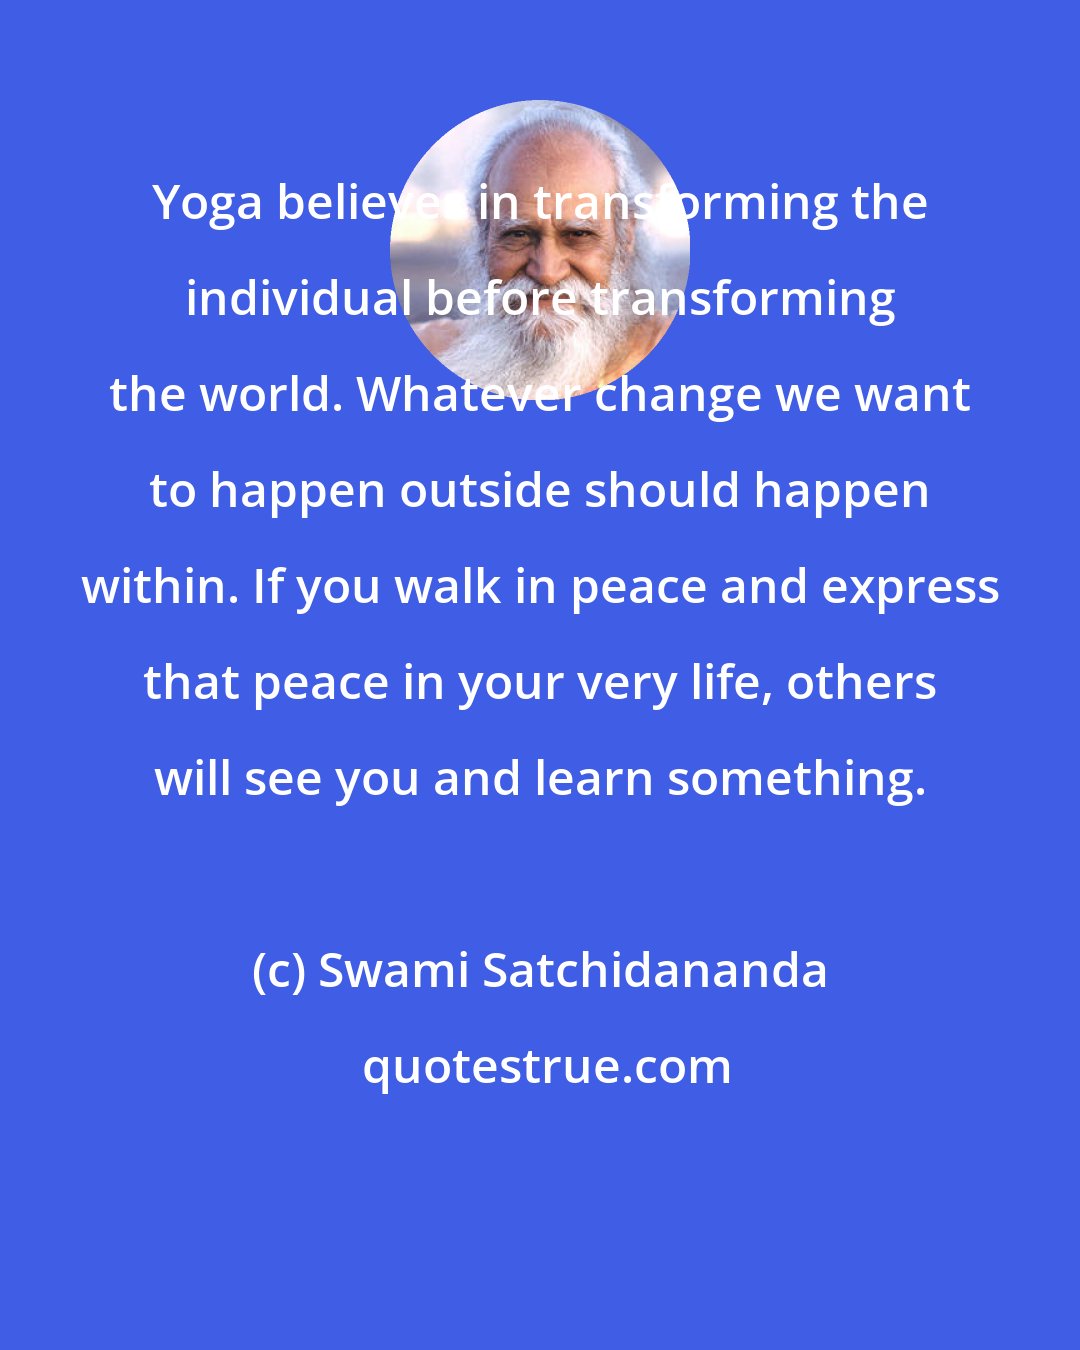 Swami Satchidananda: Yoga believes in transforming the individual before transforming the world. Whatever change we want to happen outside should happen within. If you walk in peace and express that peace in your very life, others will see you and learn something.